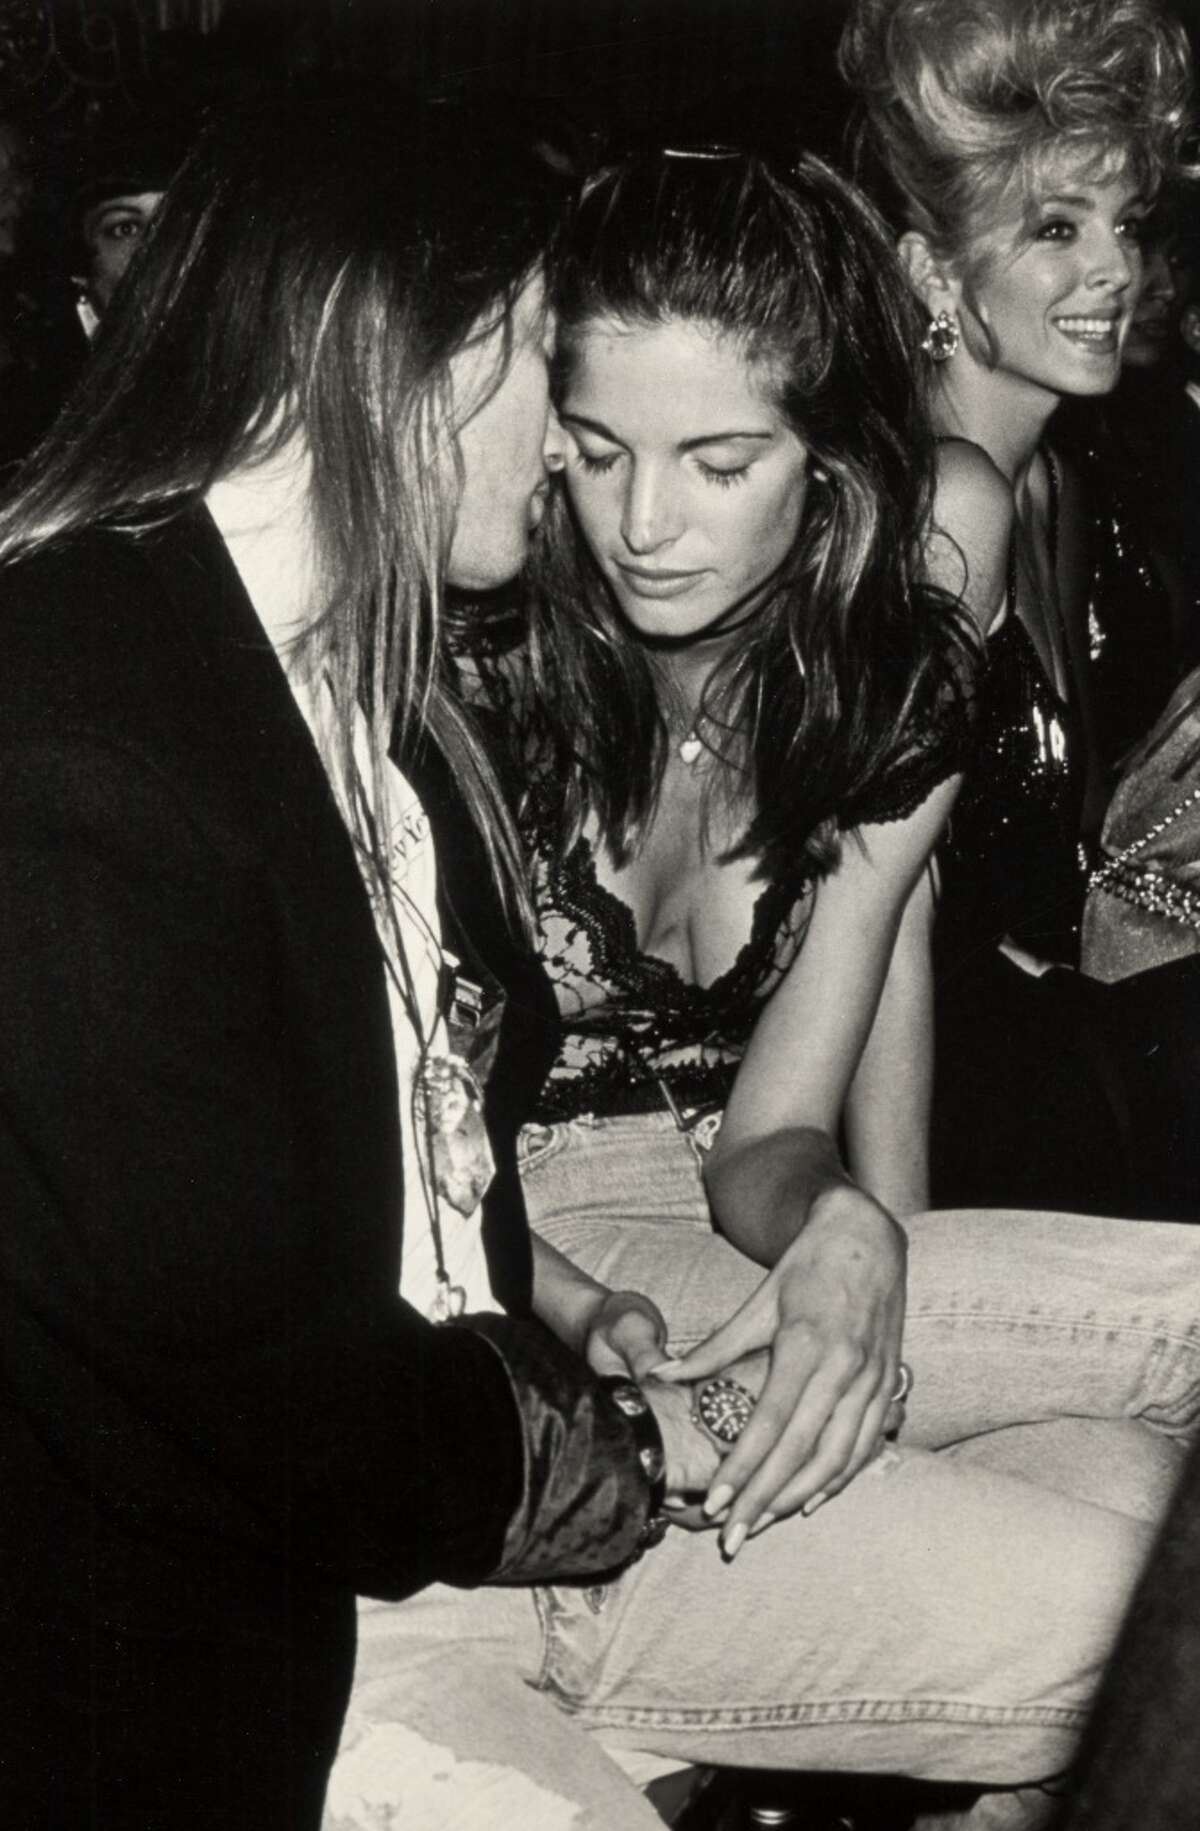 Stephanie Seymour, seen here in 1991 at age 23 with then-boyfriend Axl Rose, appeared in many Sports Illustrated Swimsuit issues, Victoria's Secret catalogues and posed for Playboy.